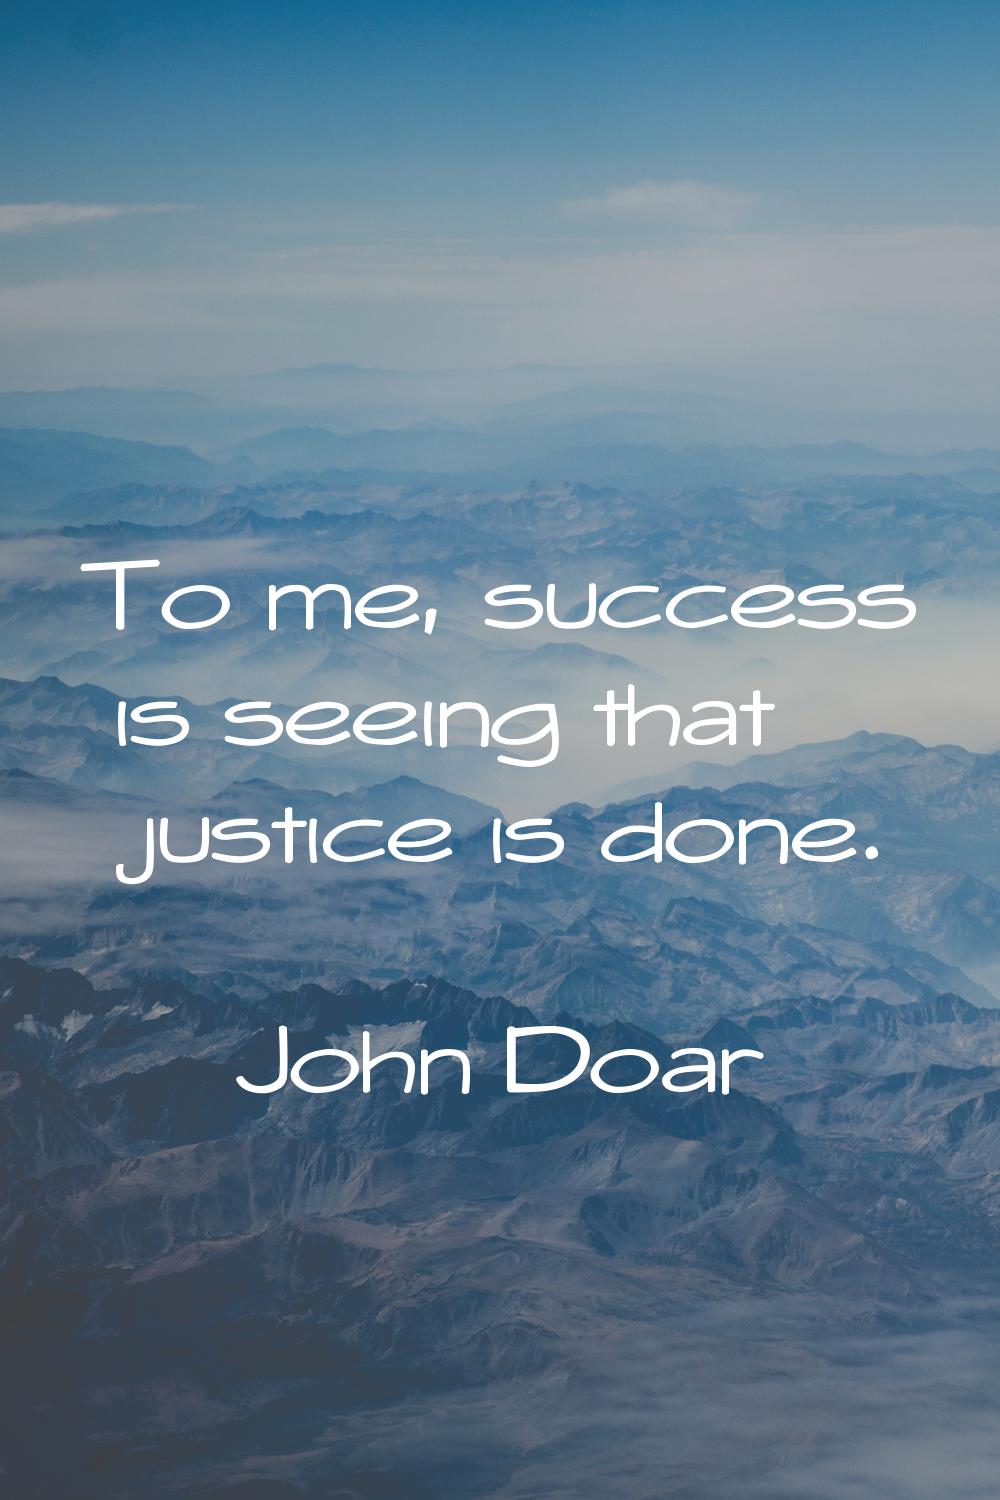 To me, success is seeing that justice is done.